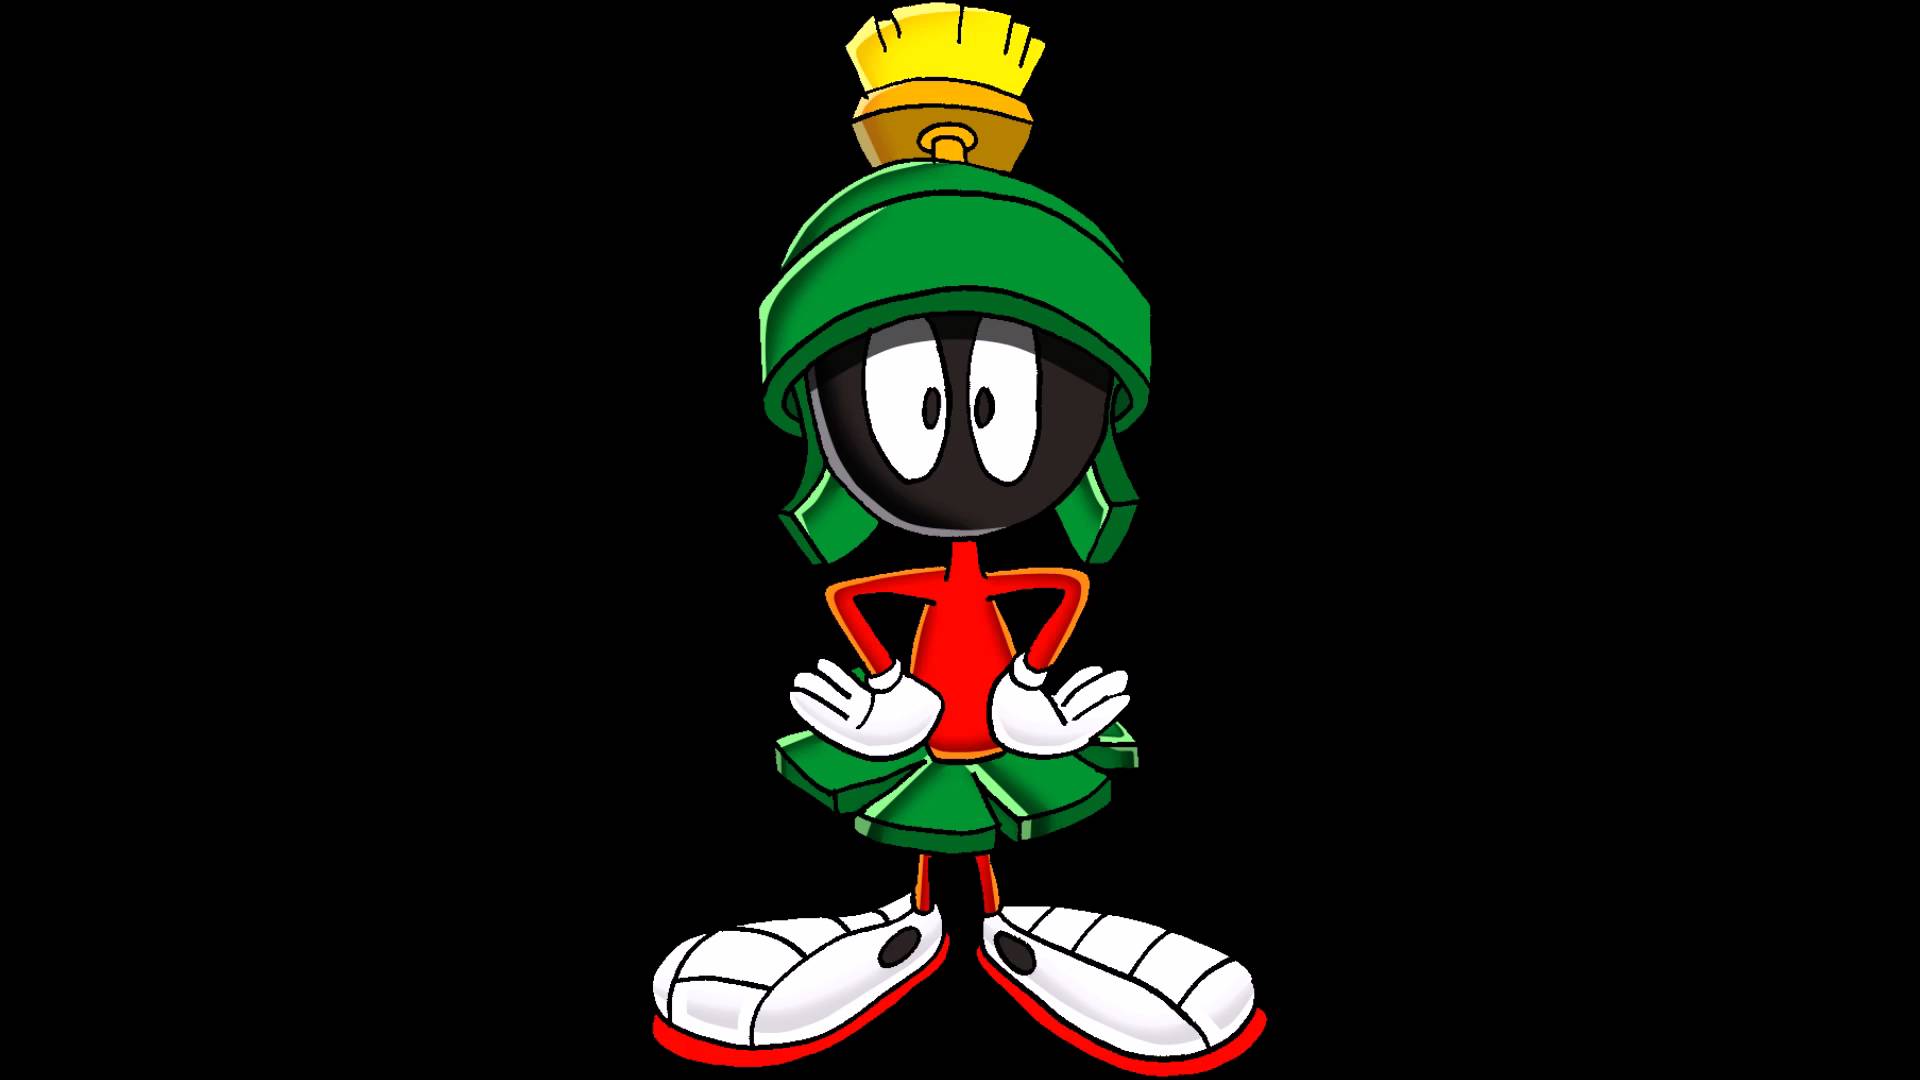 Marvin the Martian Wallpaper Free Marvin the Martian Background